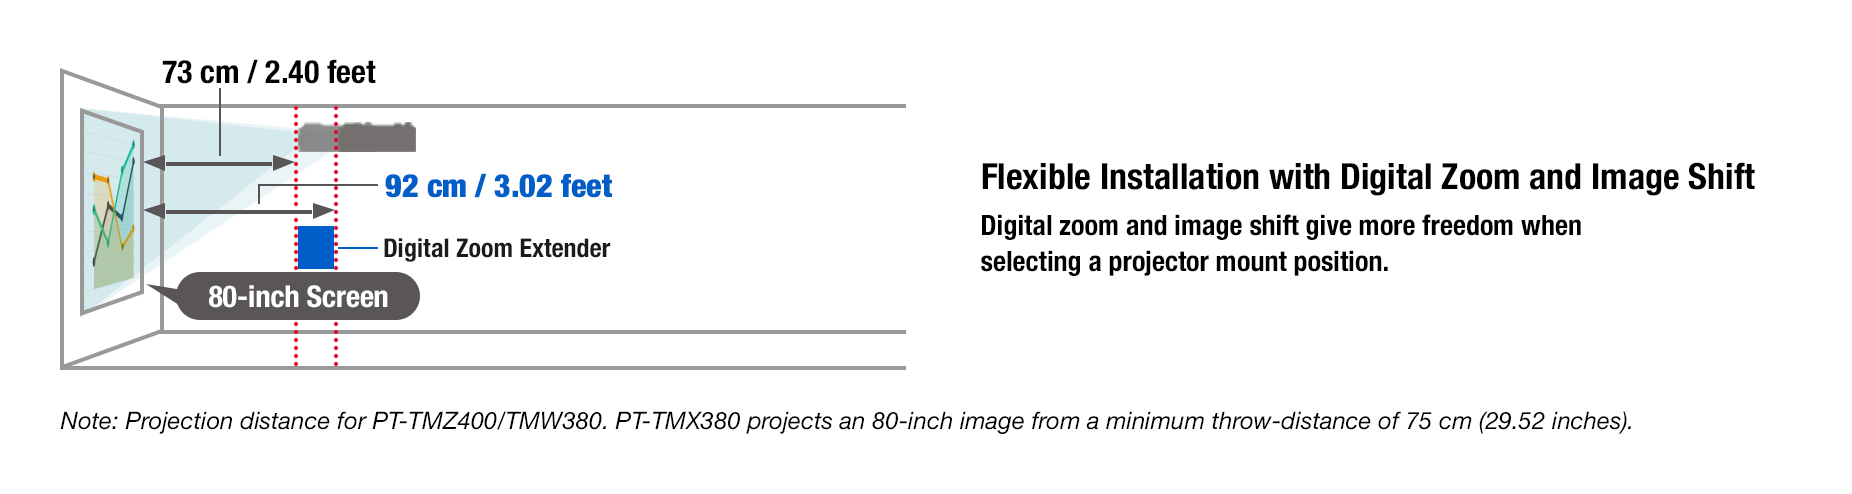 Flexible Installation with Digital Zoom and Image Shift